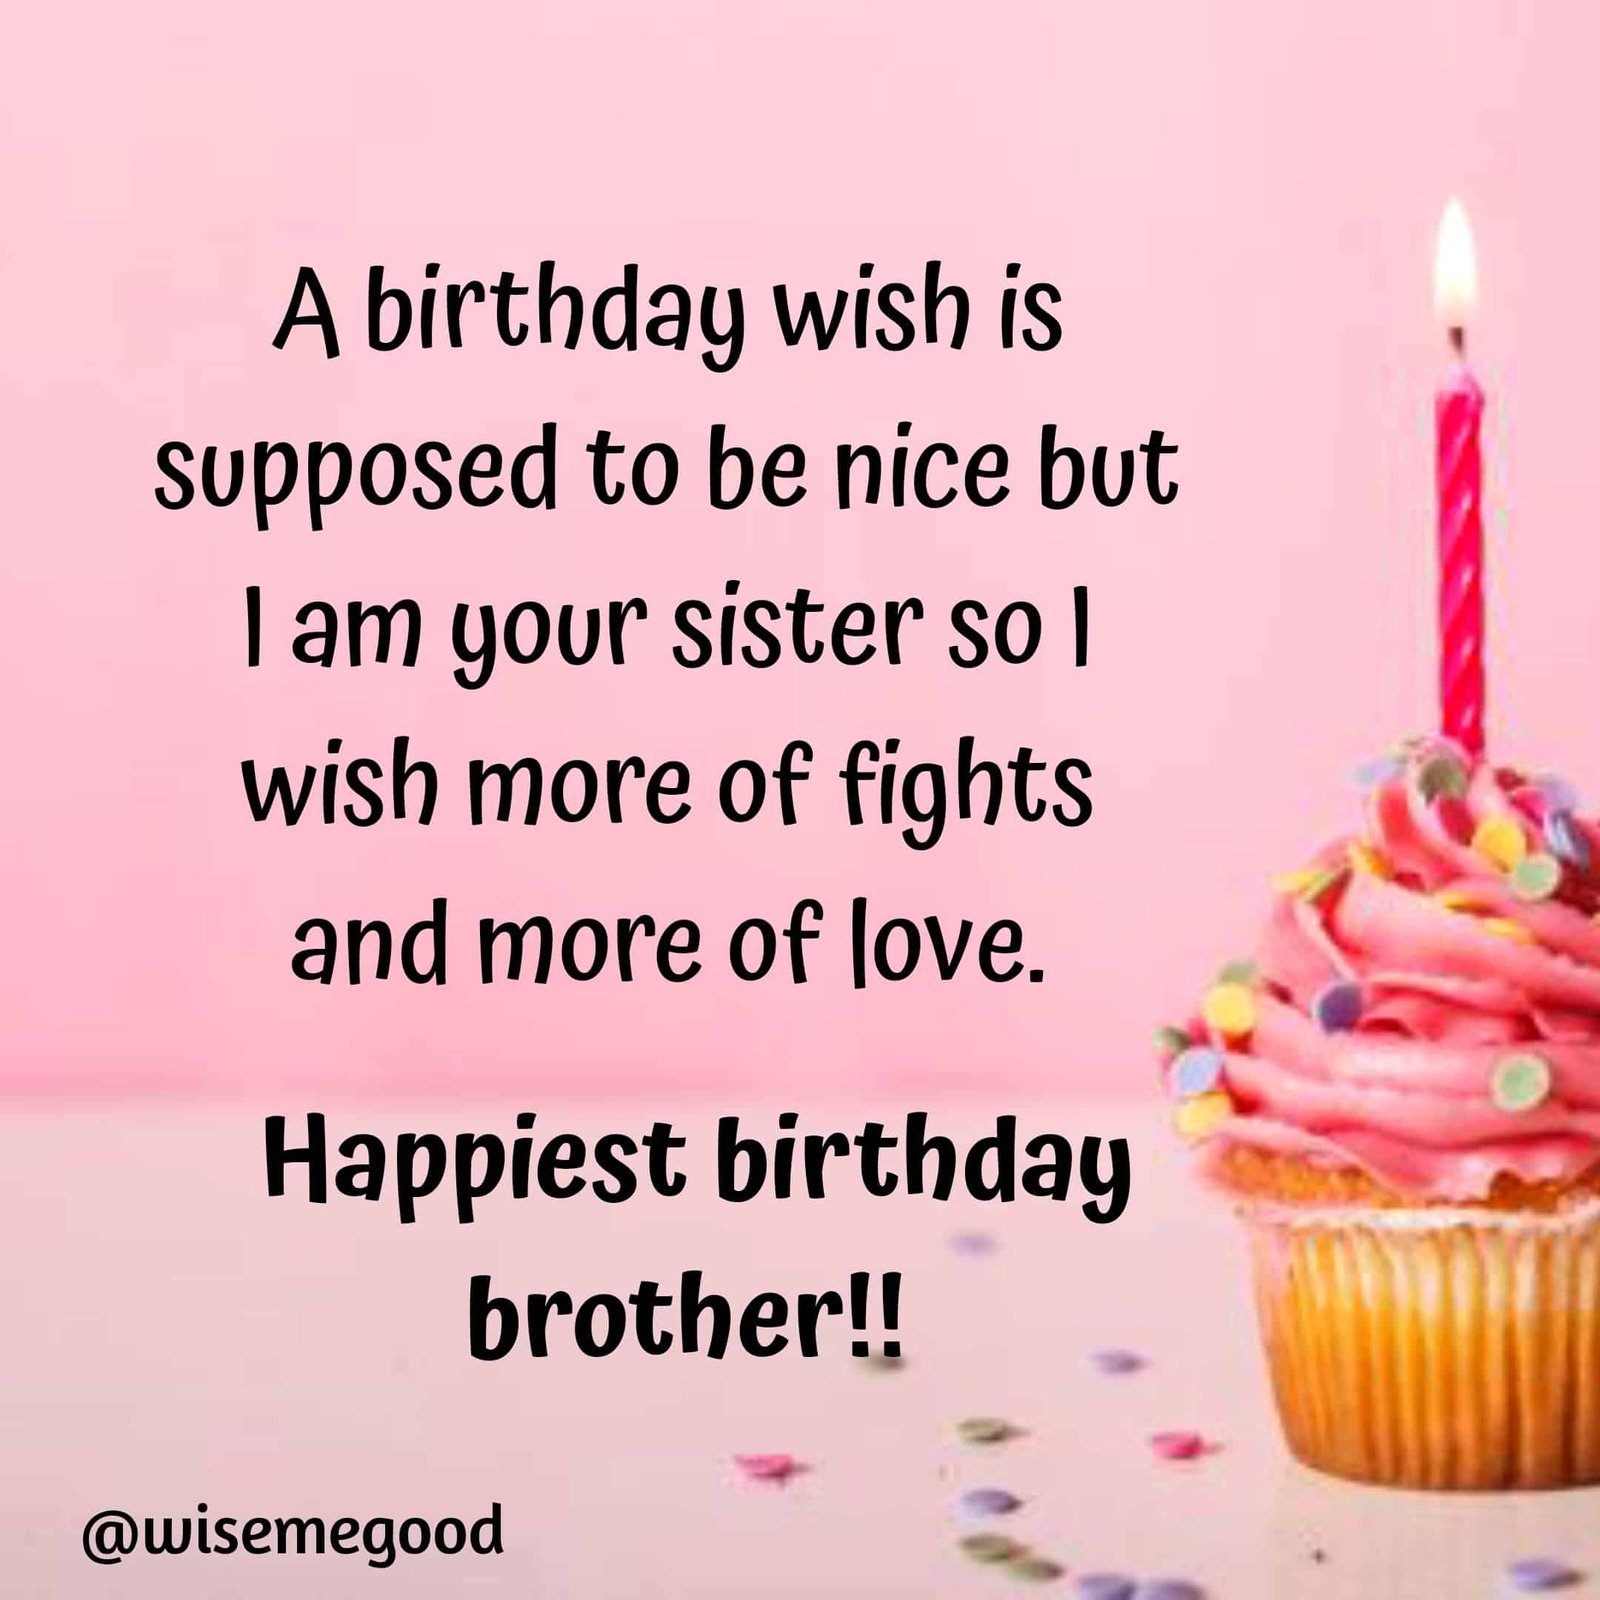 Best Quotes And Wishes For Brother's Birthday Images - Wish Me On